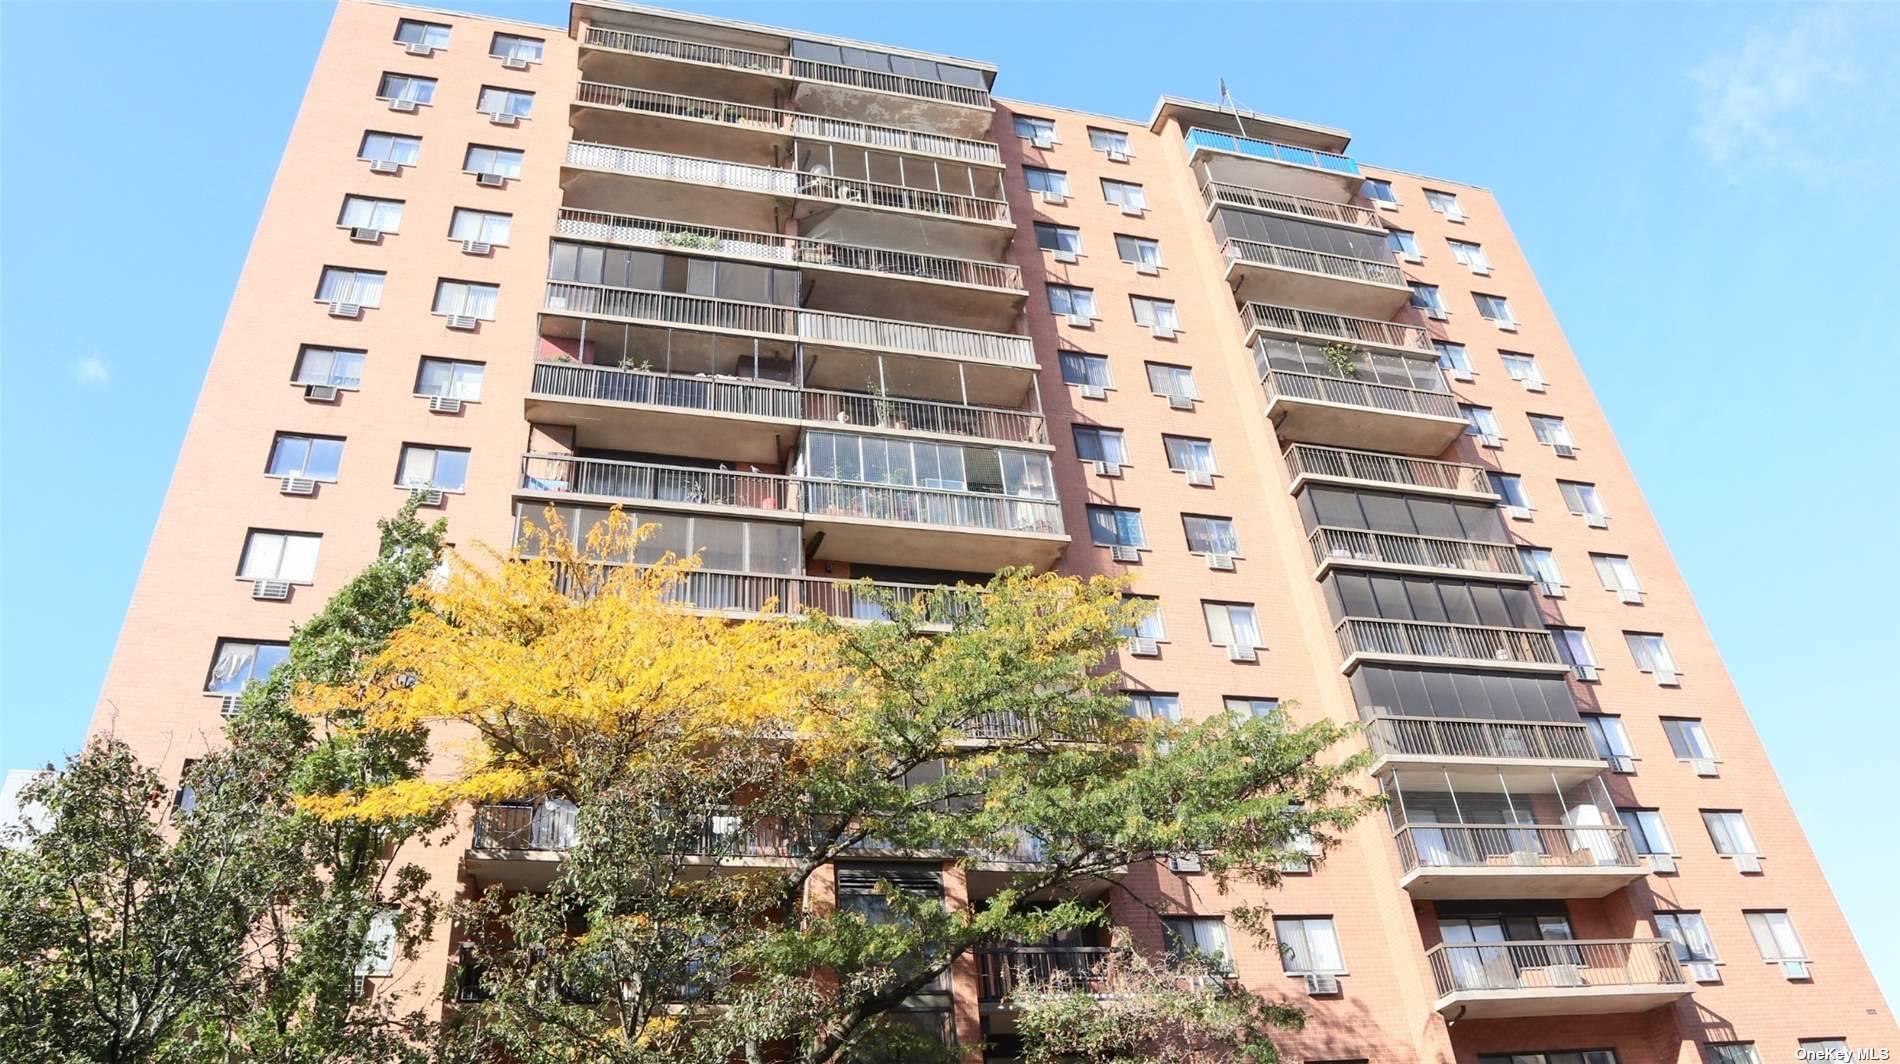 35-20 147 Street #9A in Queens, Flushing, NY 11354